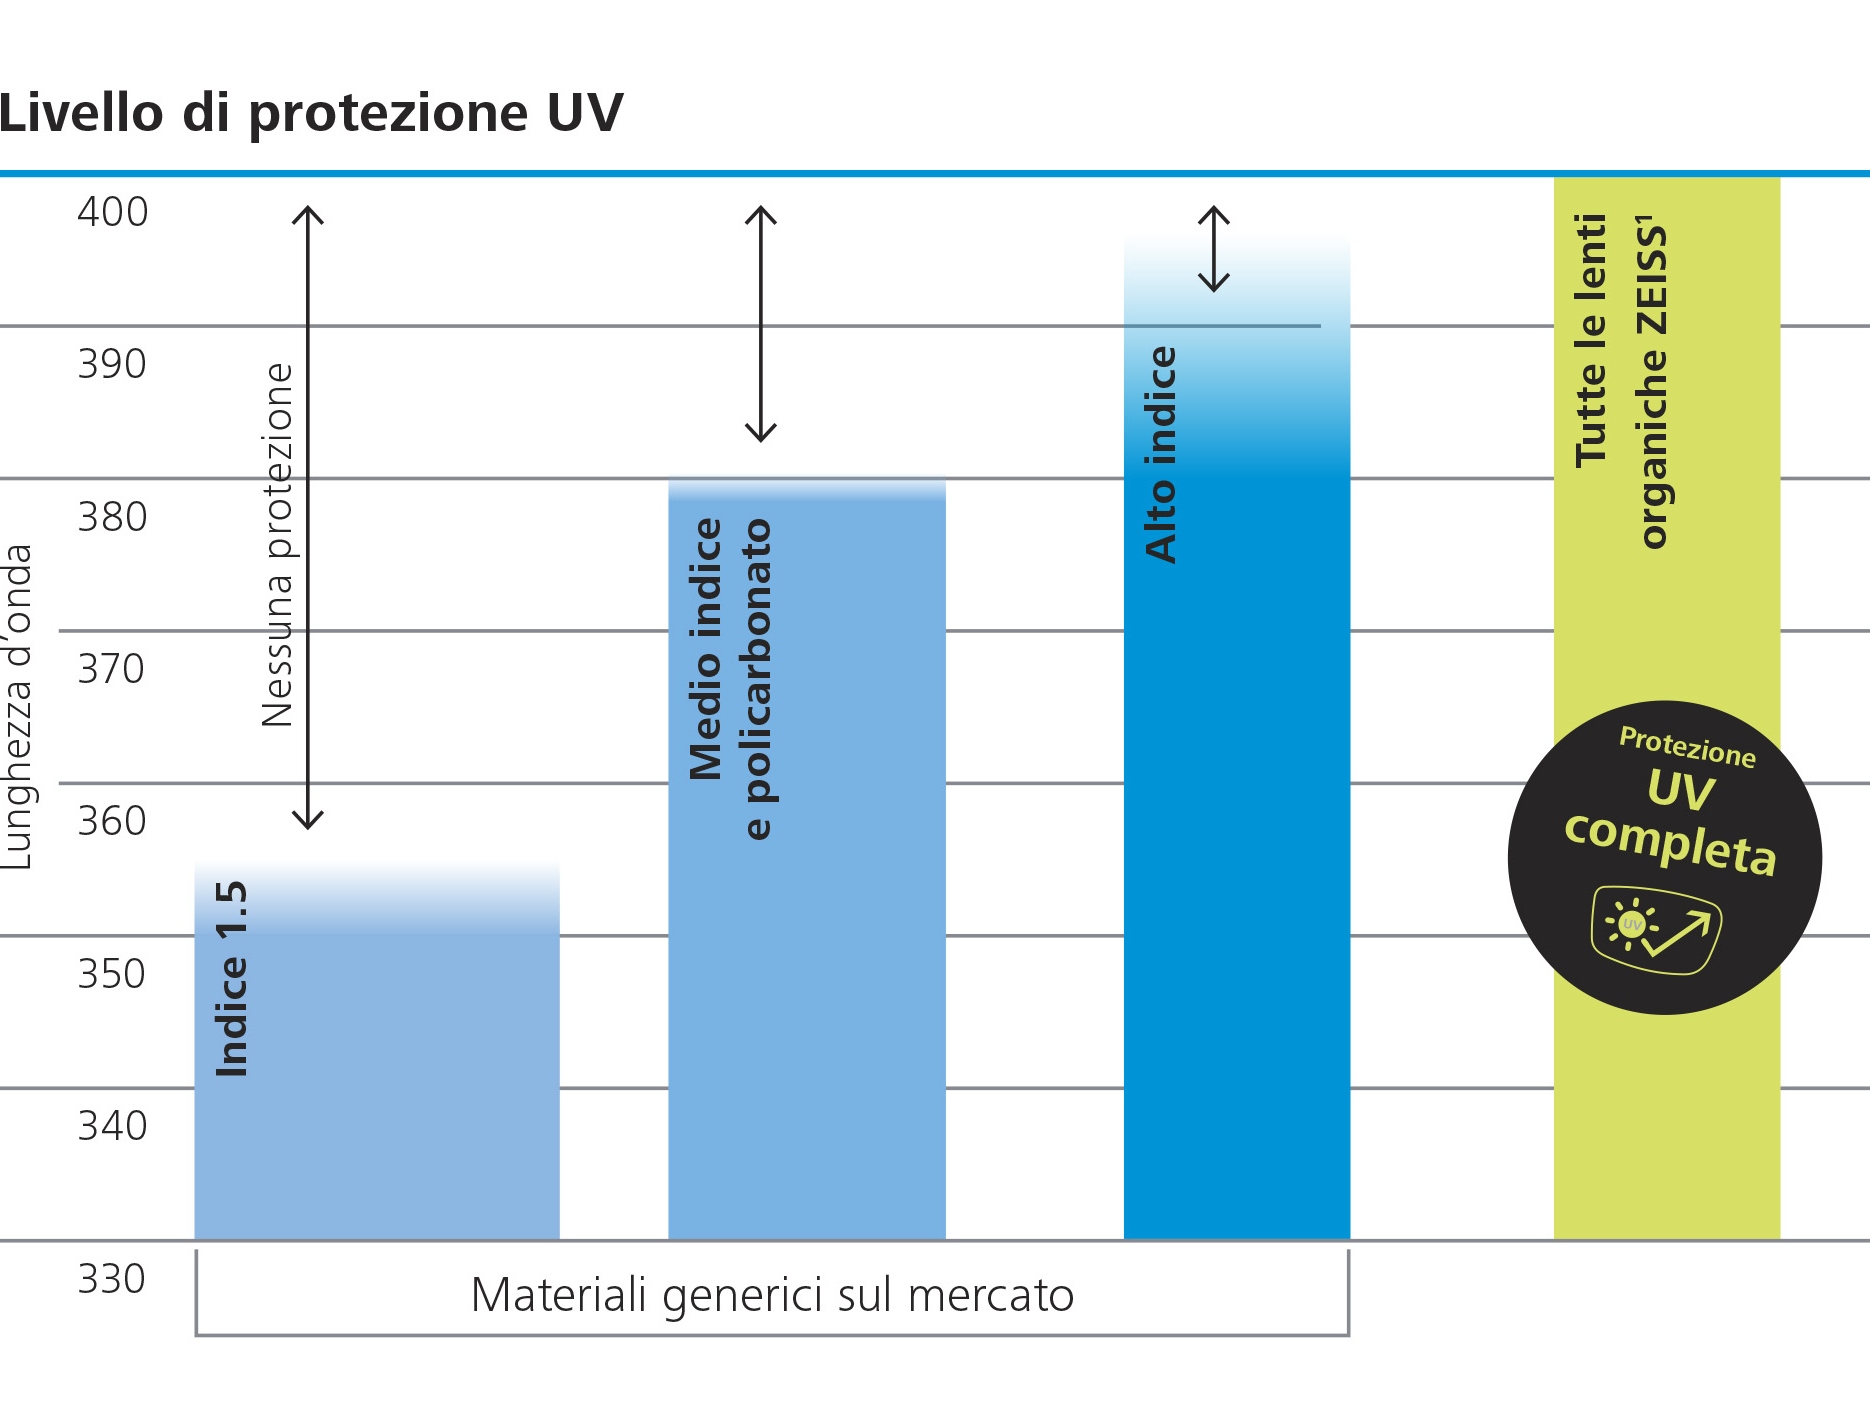 The image shows a chart, comparing the level of UV protection of ZEISS lenses and other market participants. 